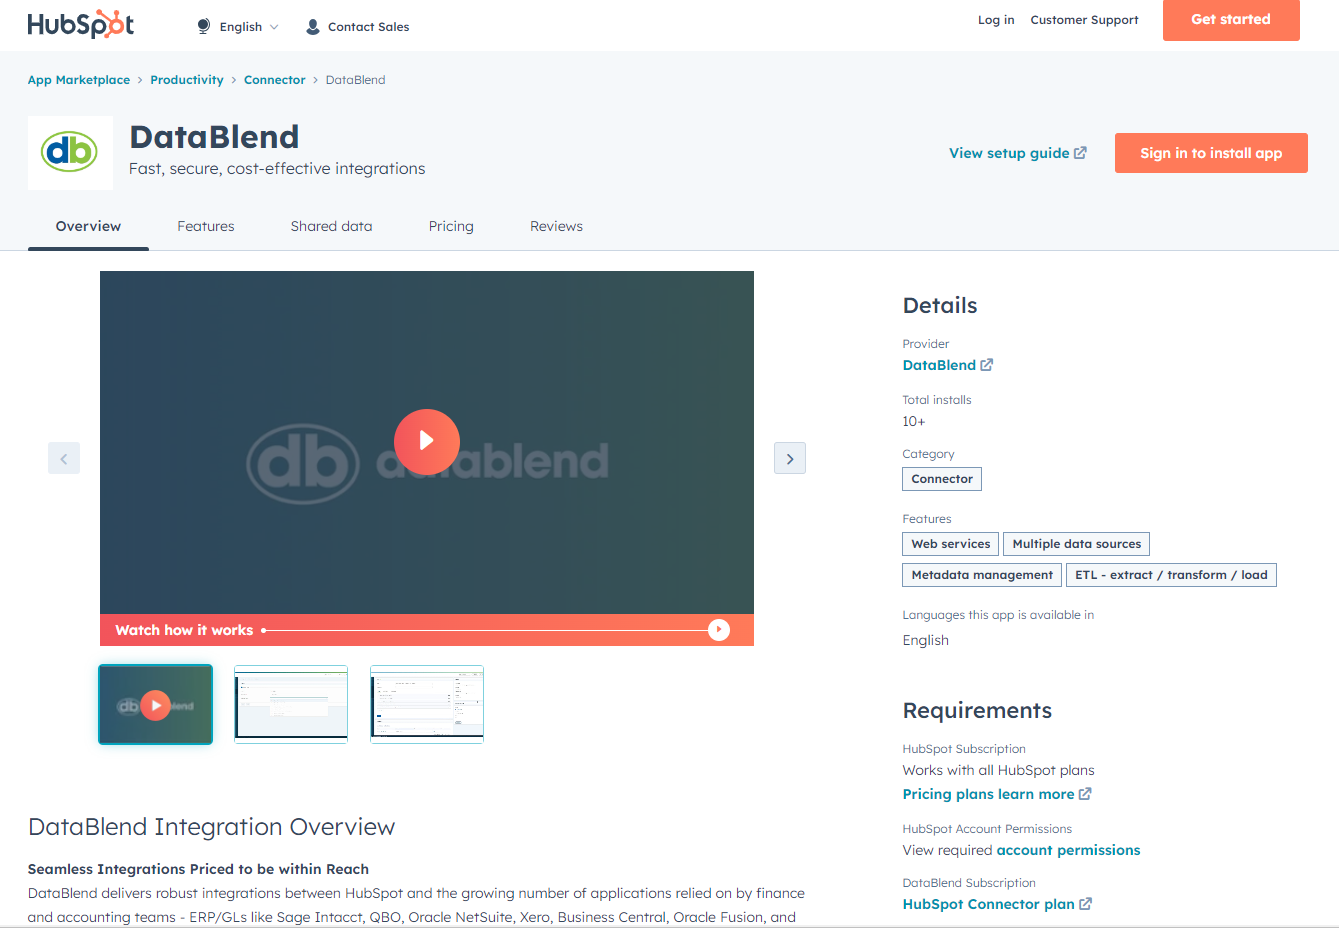 DataBlend Listed on the HubSpot App Marketplace